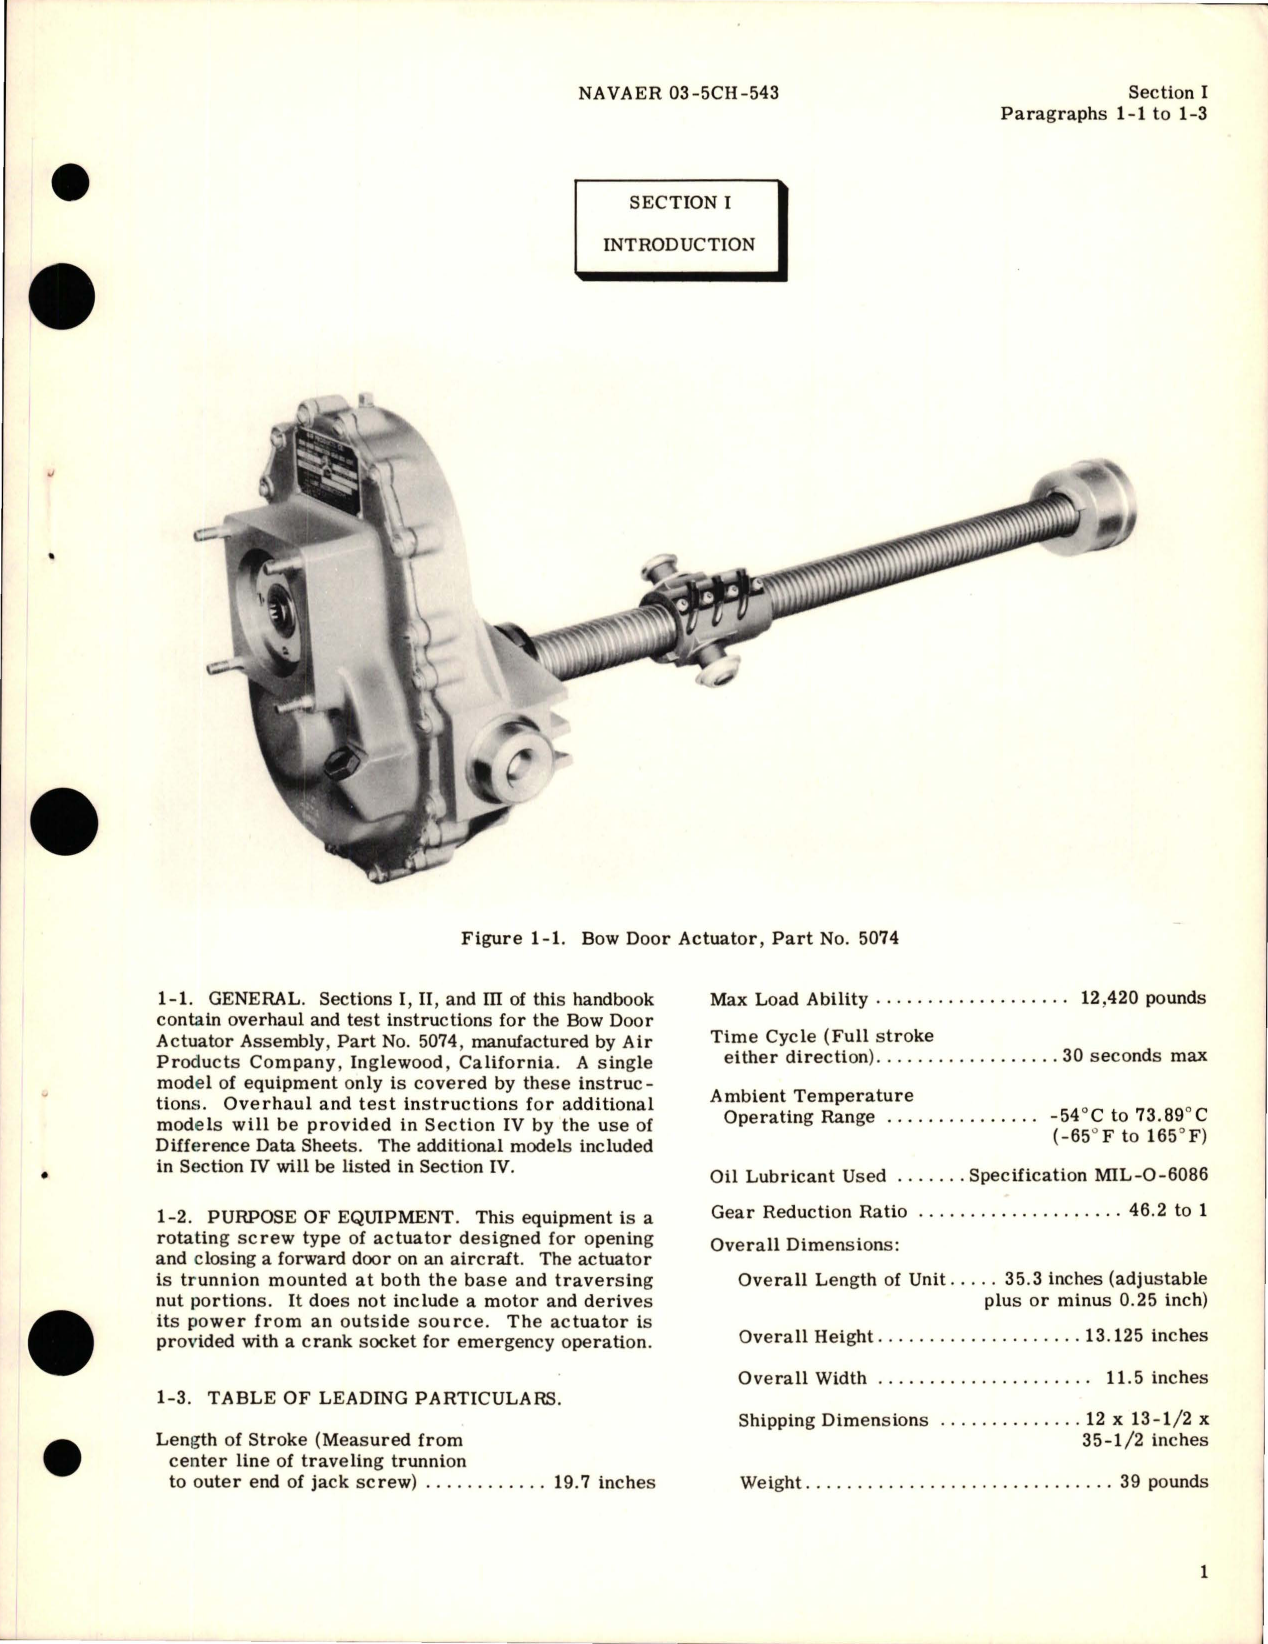 Sample page 5 from AirCorps Library document: Overhaul Instructions for Bow Door Actuator - Part 5074